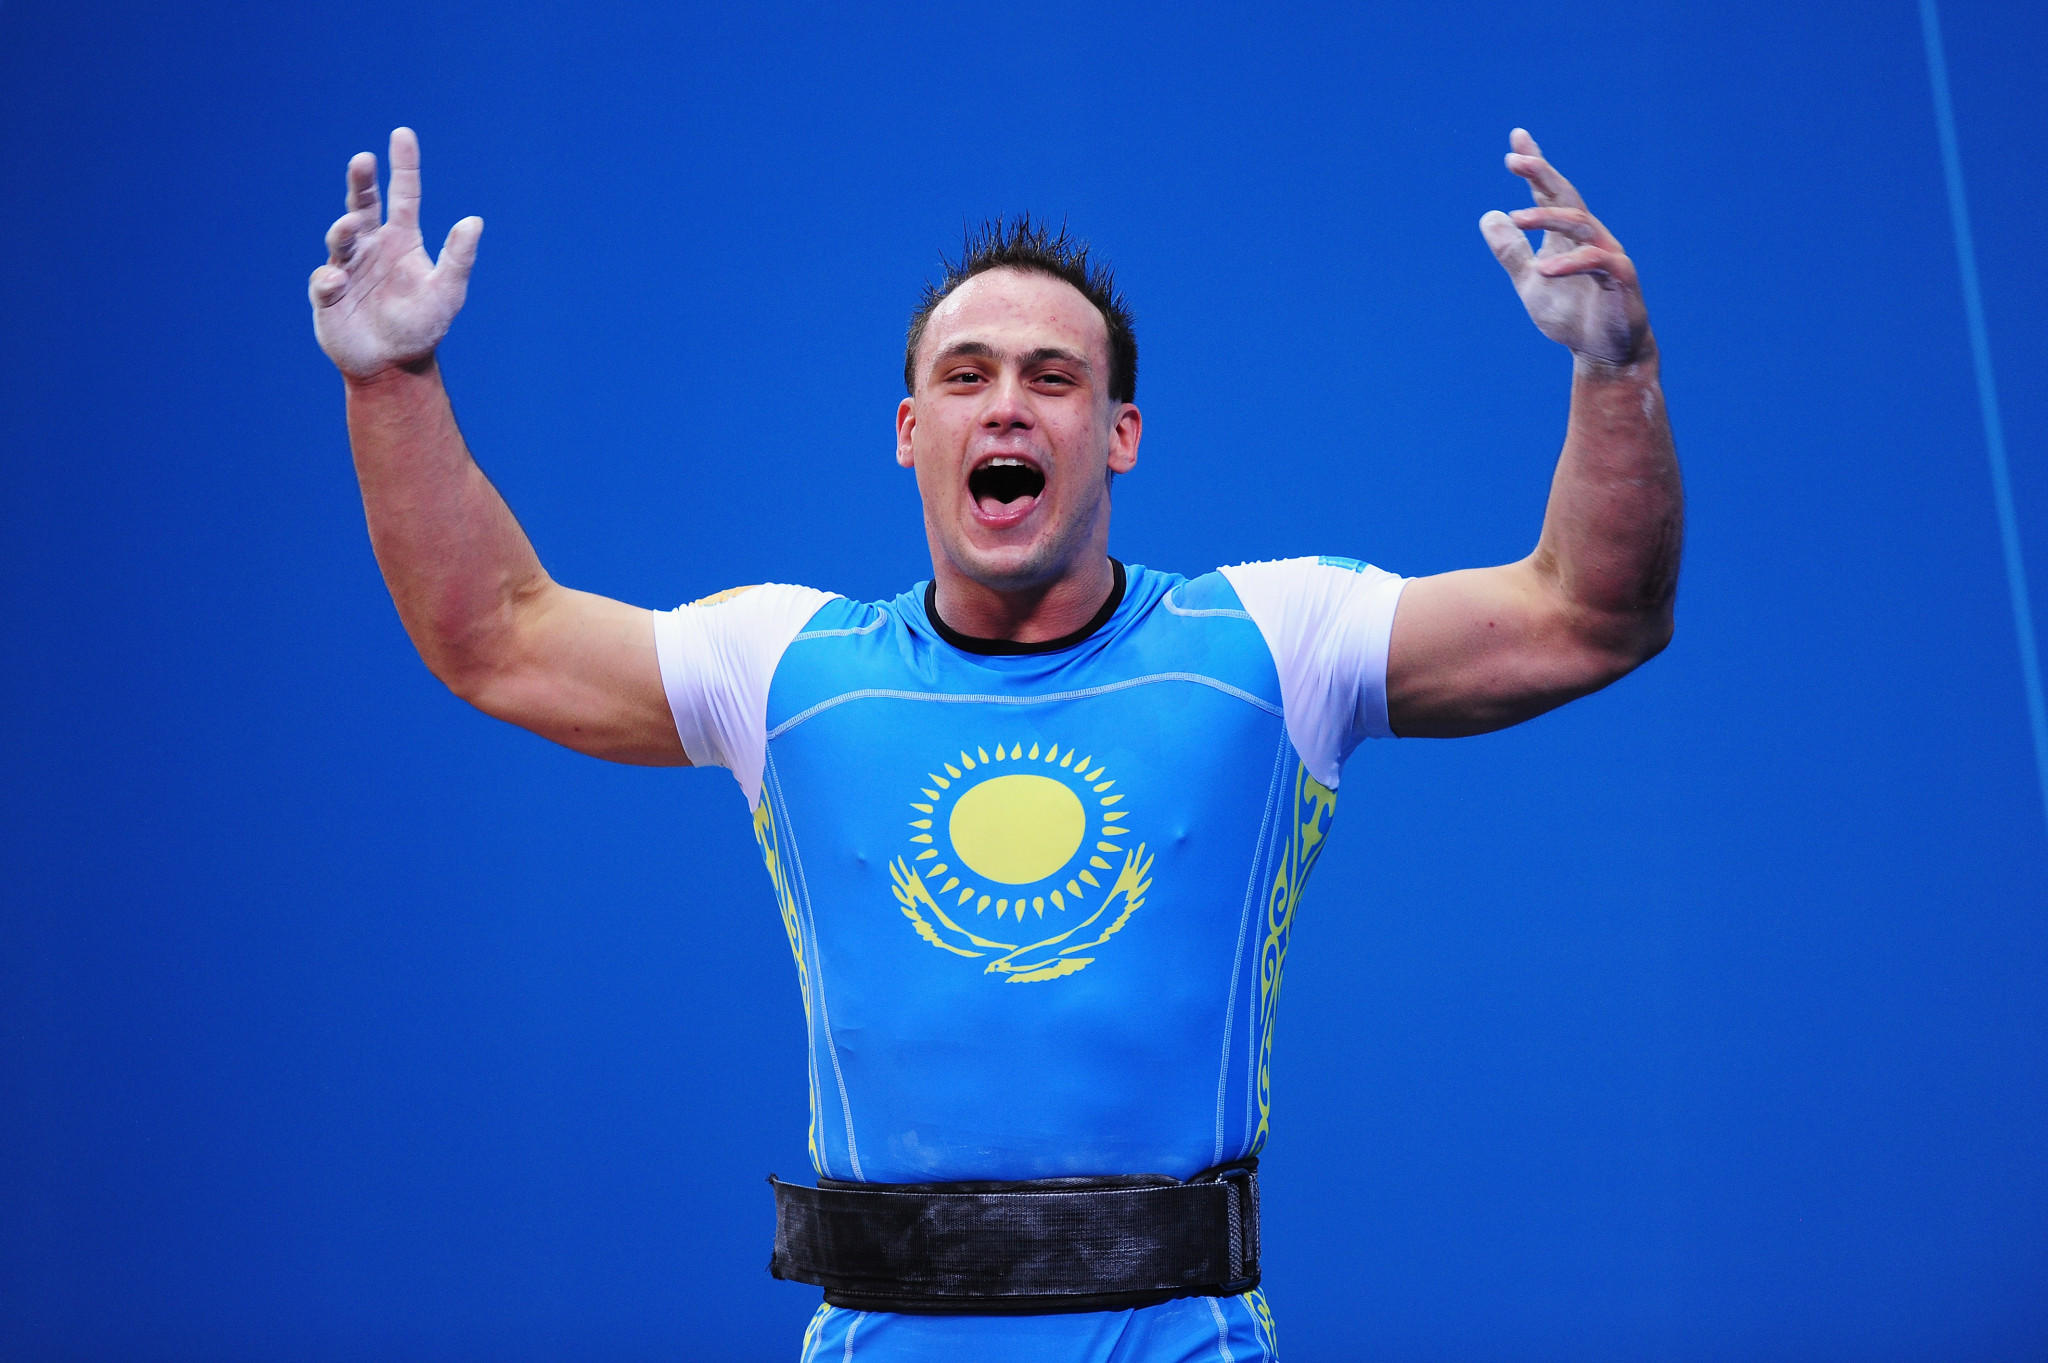 Kazakhstan's serial drugs cheat Ilya Ilyin is still hopeful of making Tokyo 2020 having already been stripped of Olympic gold medals from Beijing 2008 and London 2012 because of doping ©Getty Images